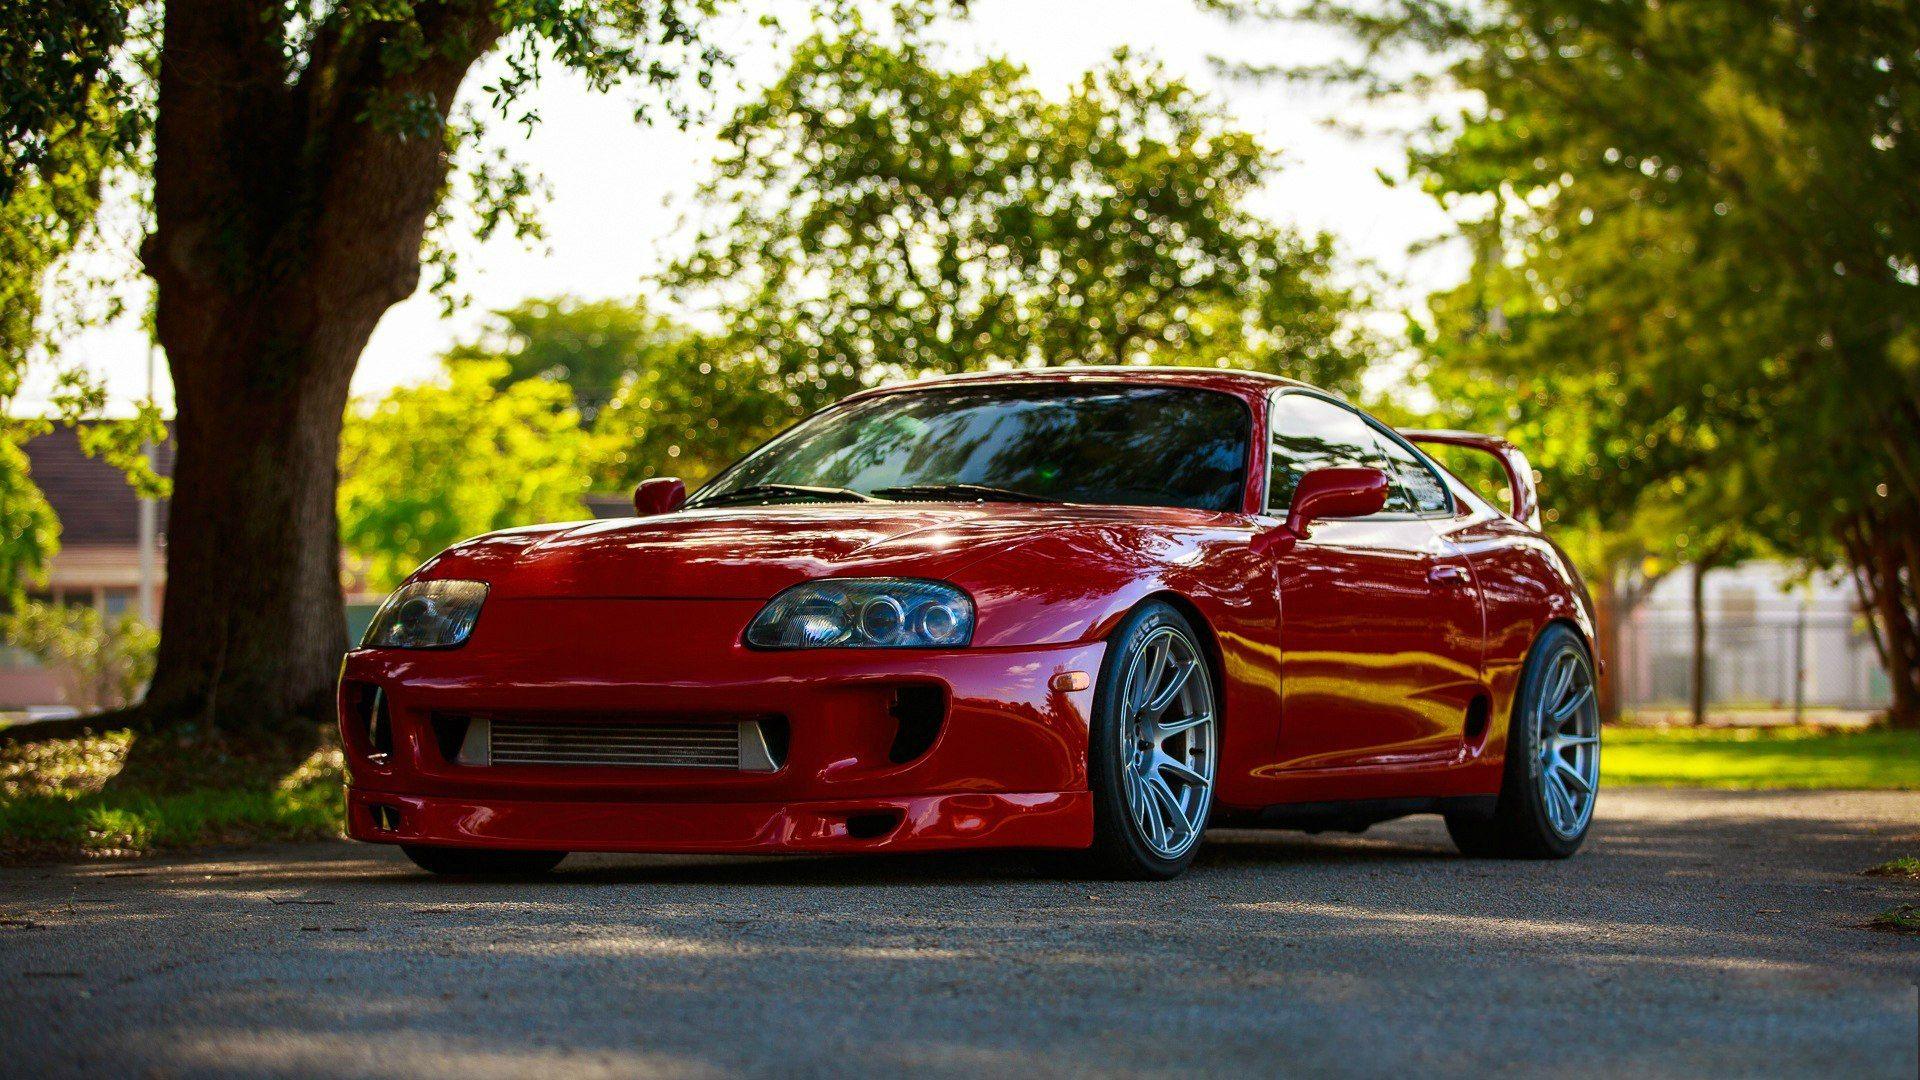 Red Toyota Supra wallpaper and image, picture, photo